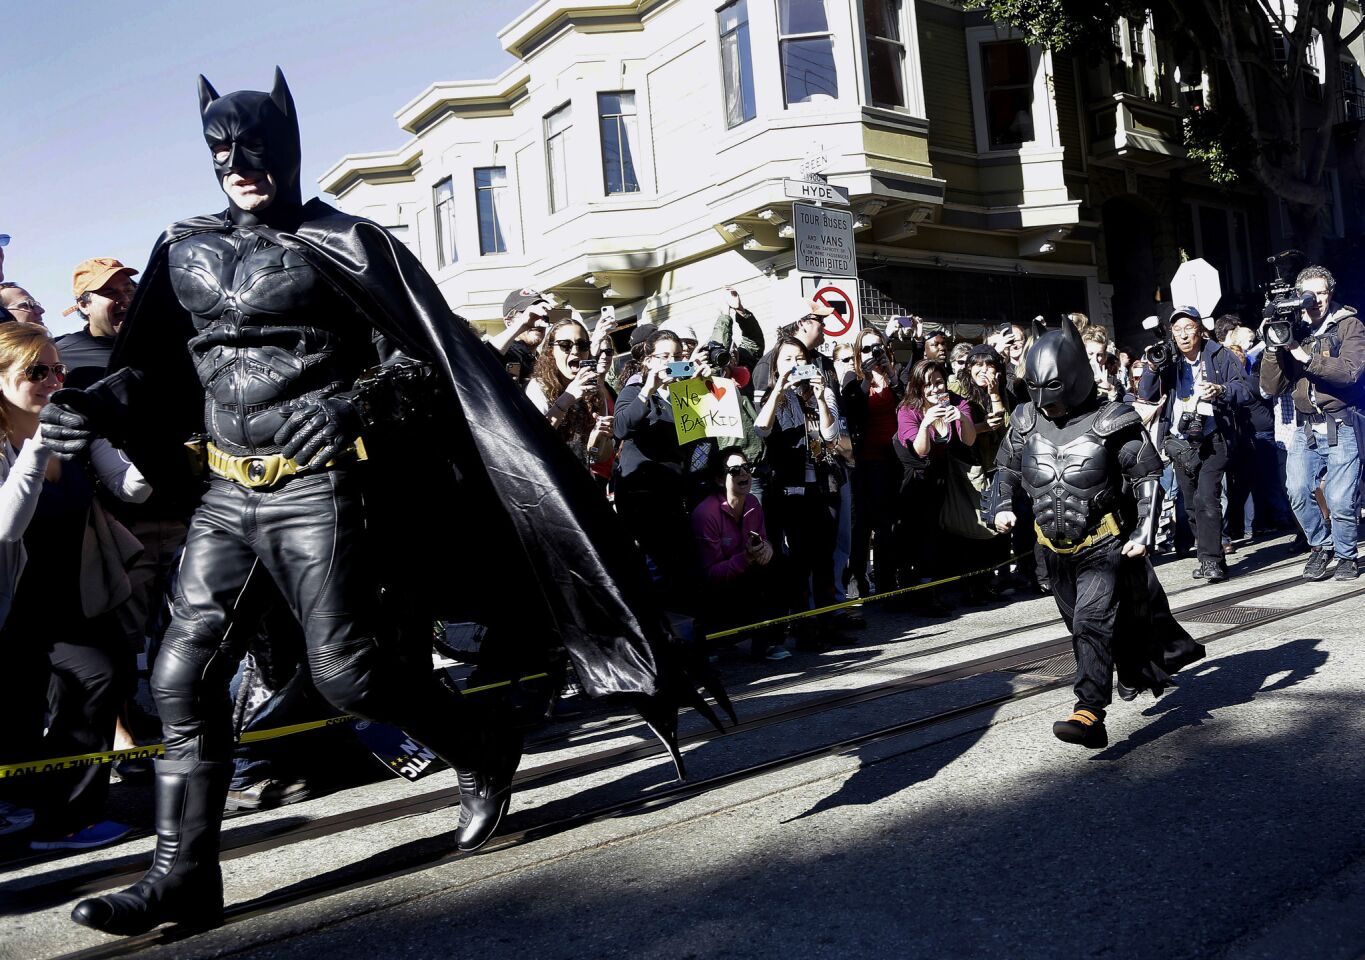 Miles Scott, dressed as Batkid, runs with Batman after saving a damsel in distress in San Francisco. The 5-year-old boy, whose leukemia was in remission, wsa participating in a Make-A-Wish Foundation event.